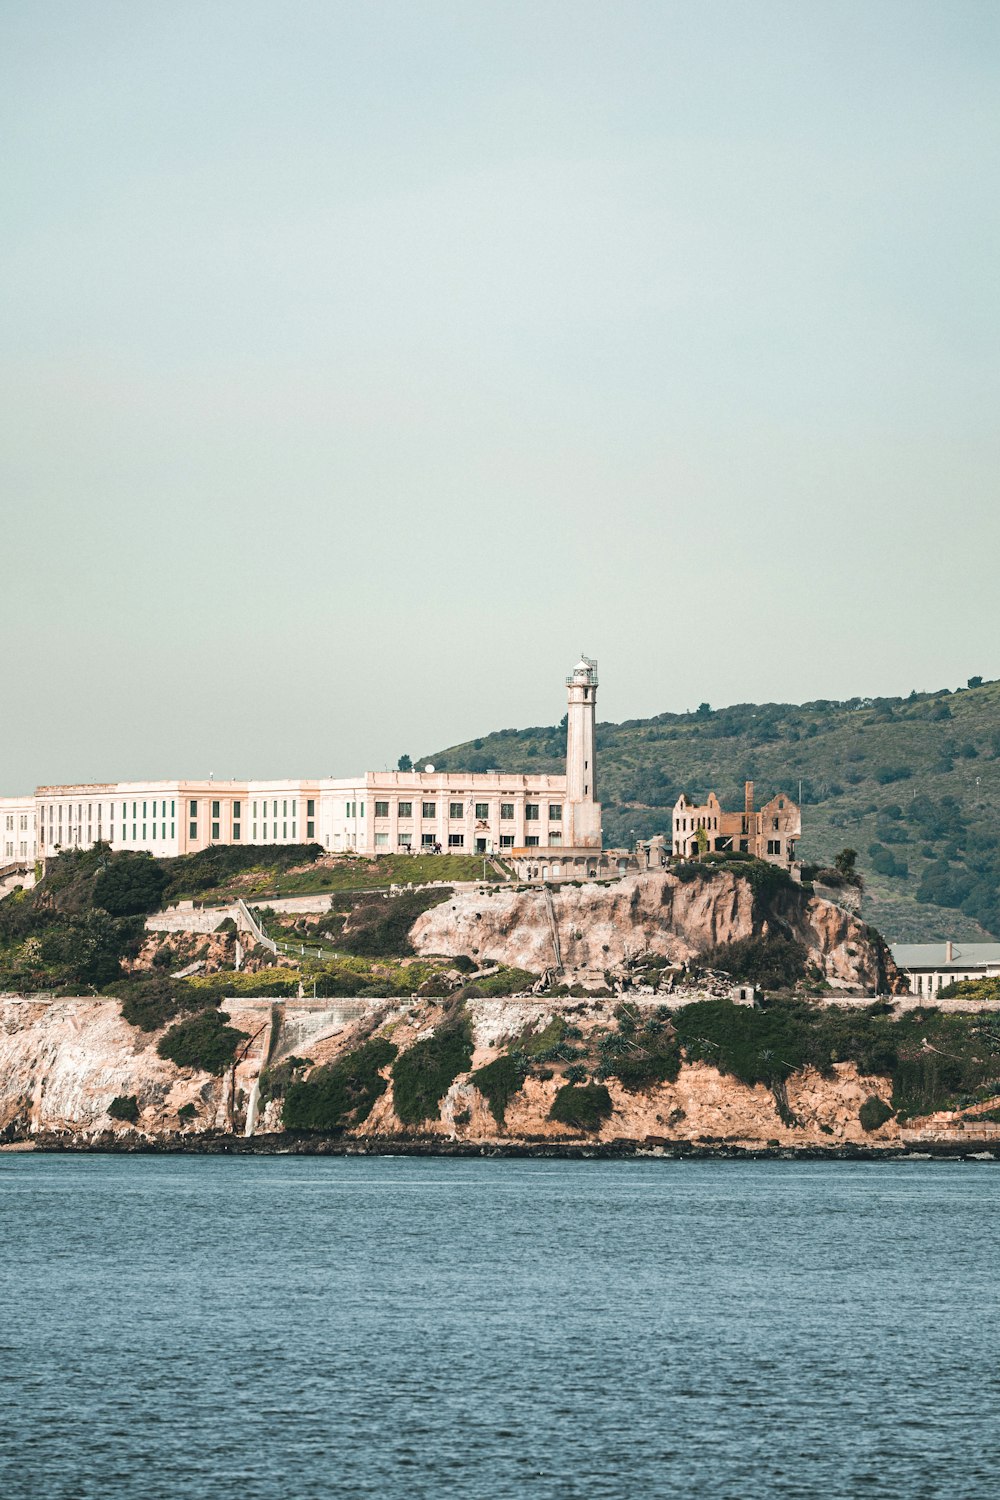 a large building sitting on top of a hill next to a body of water